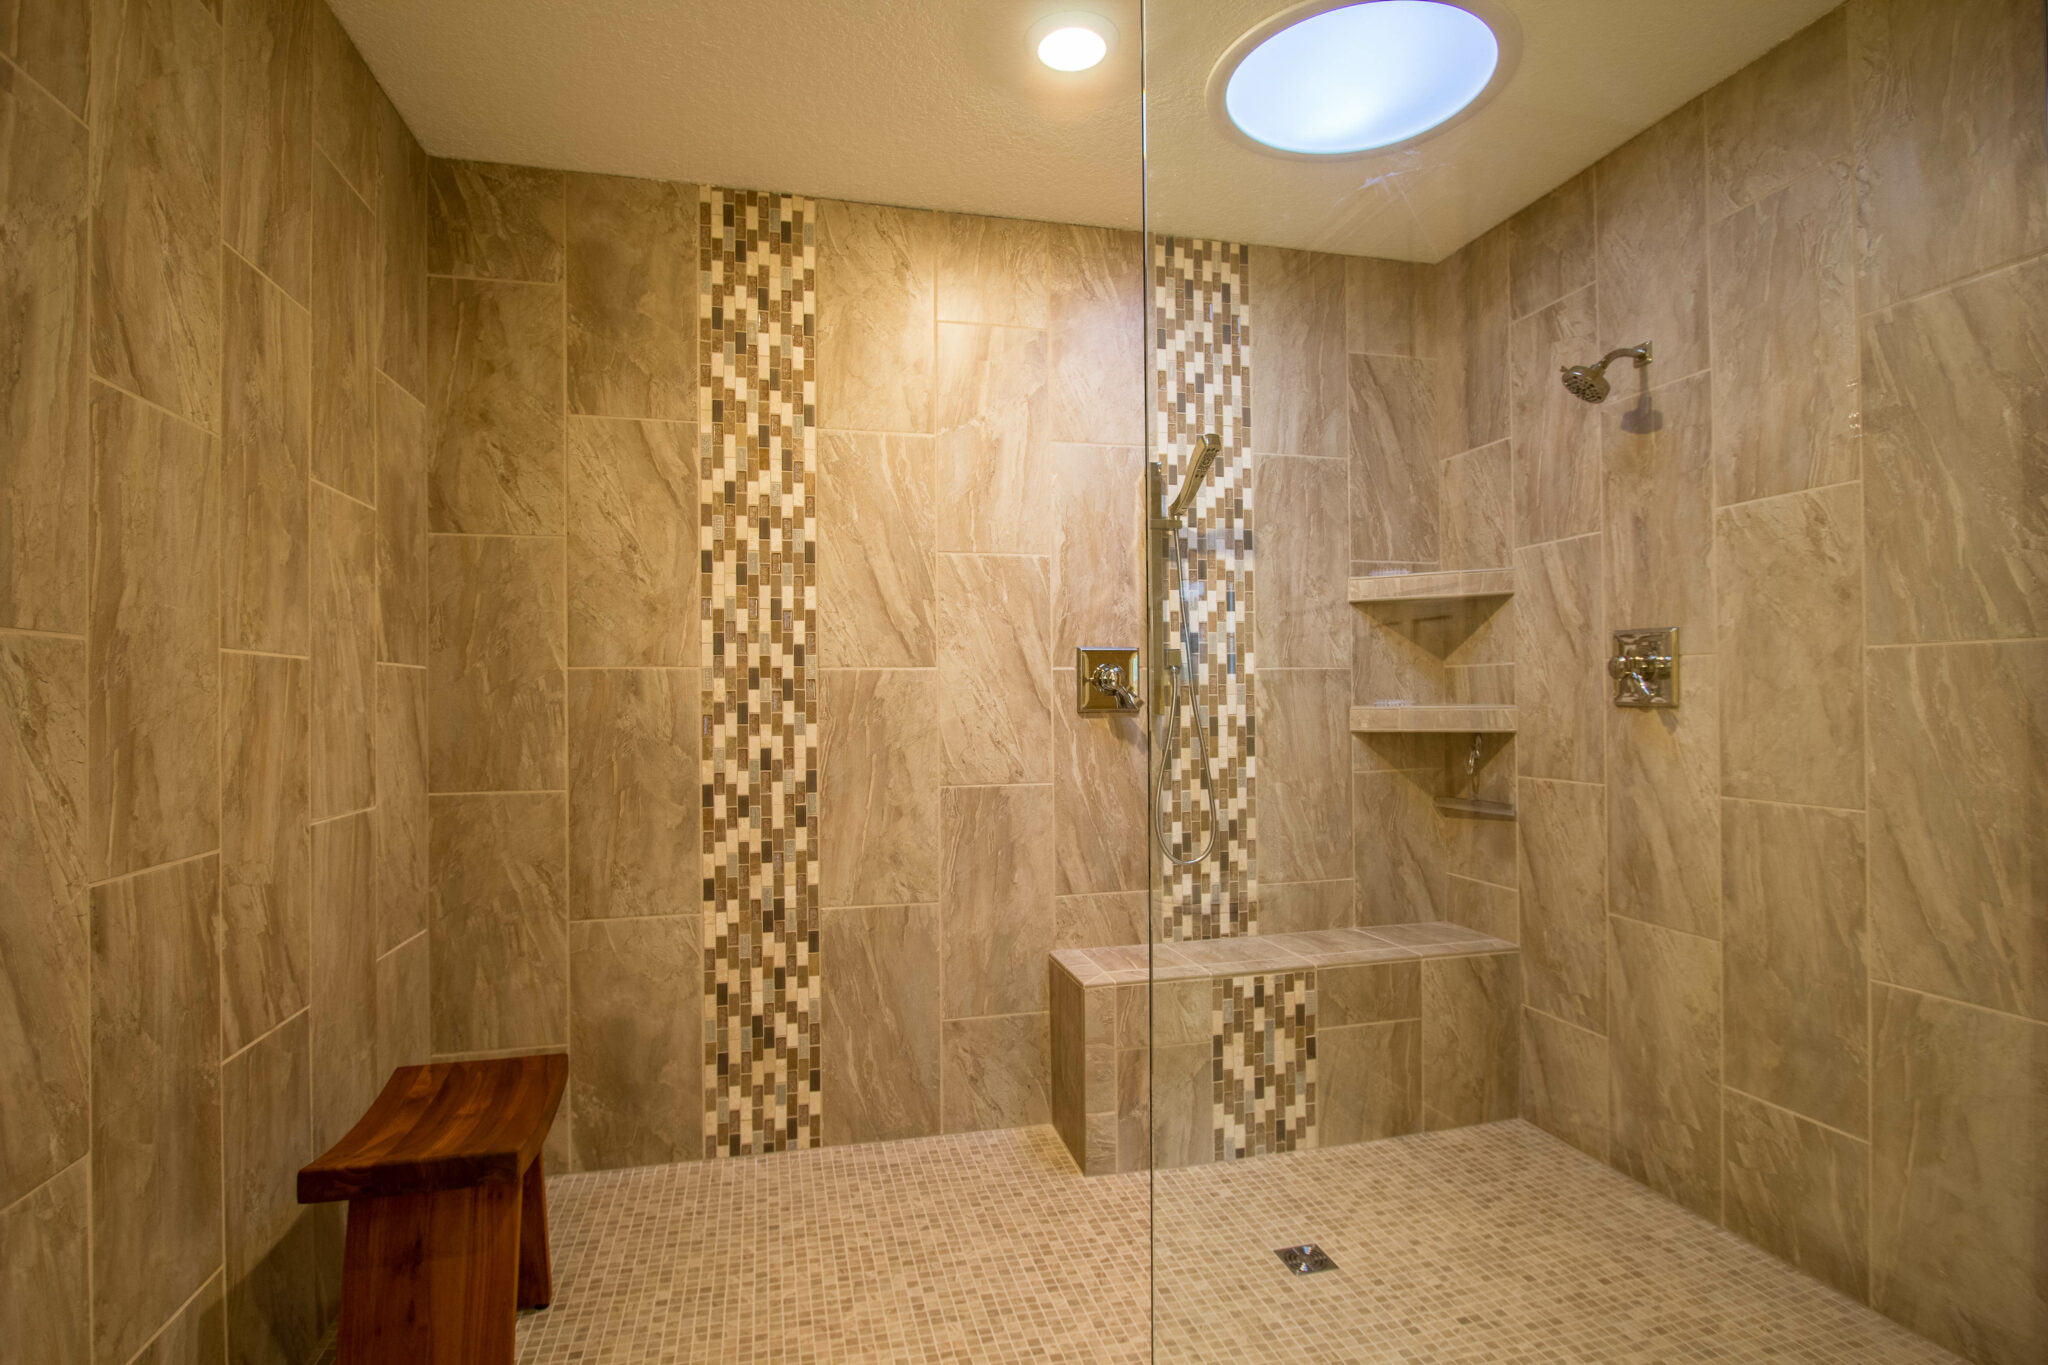 A walk-in shower is a great option for aging homeowners.